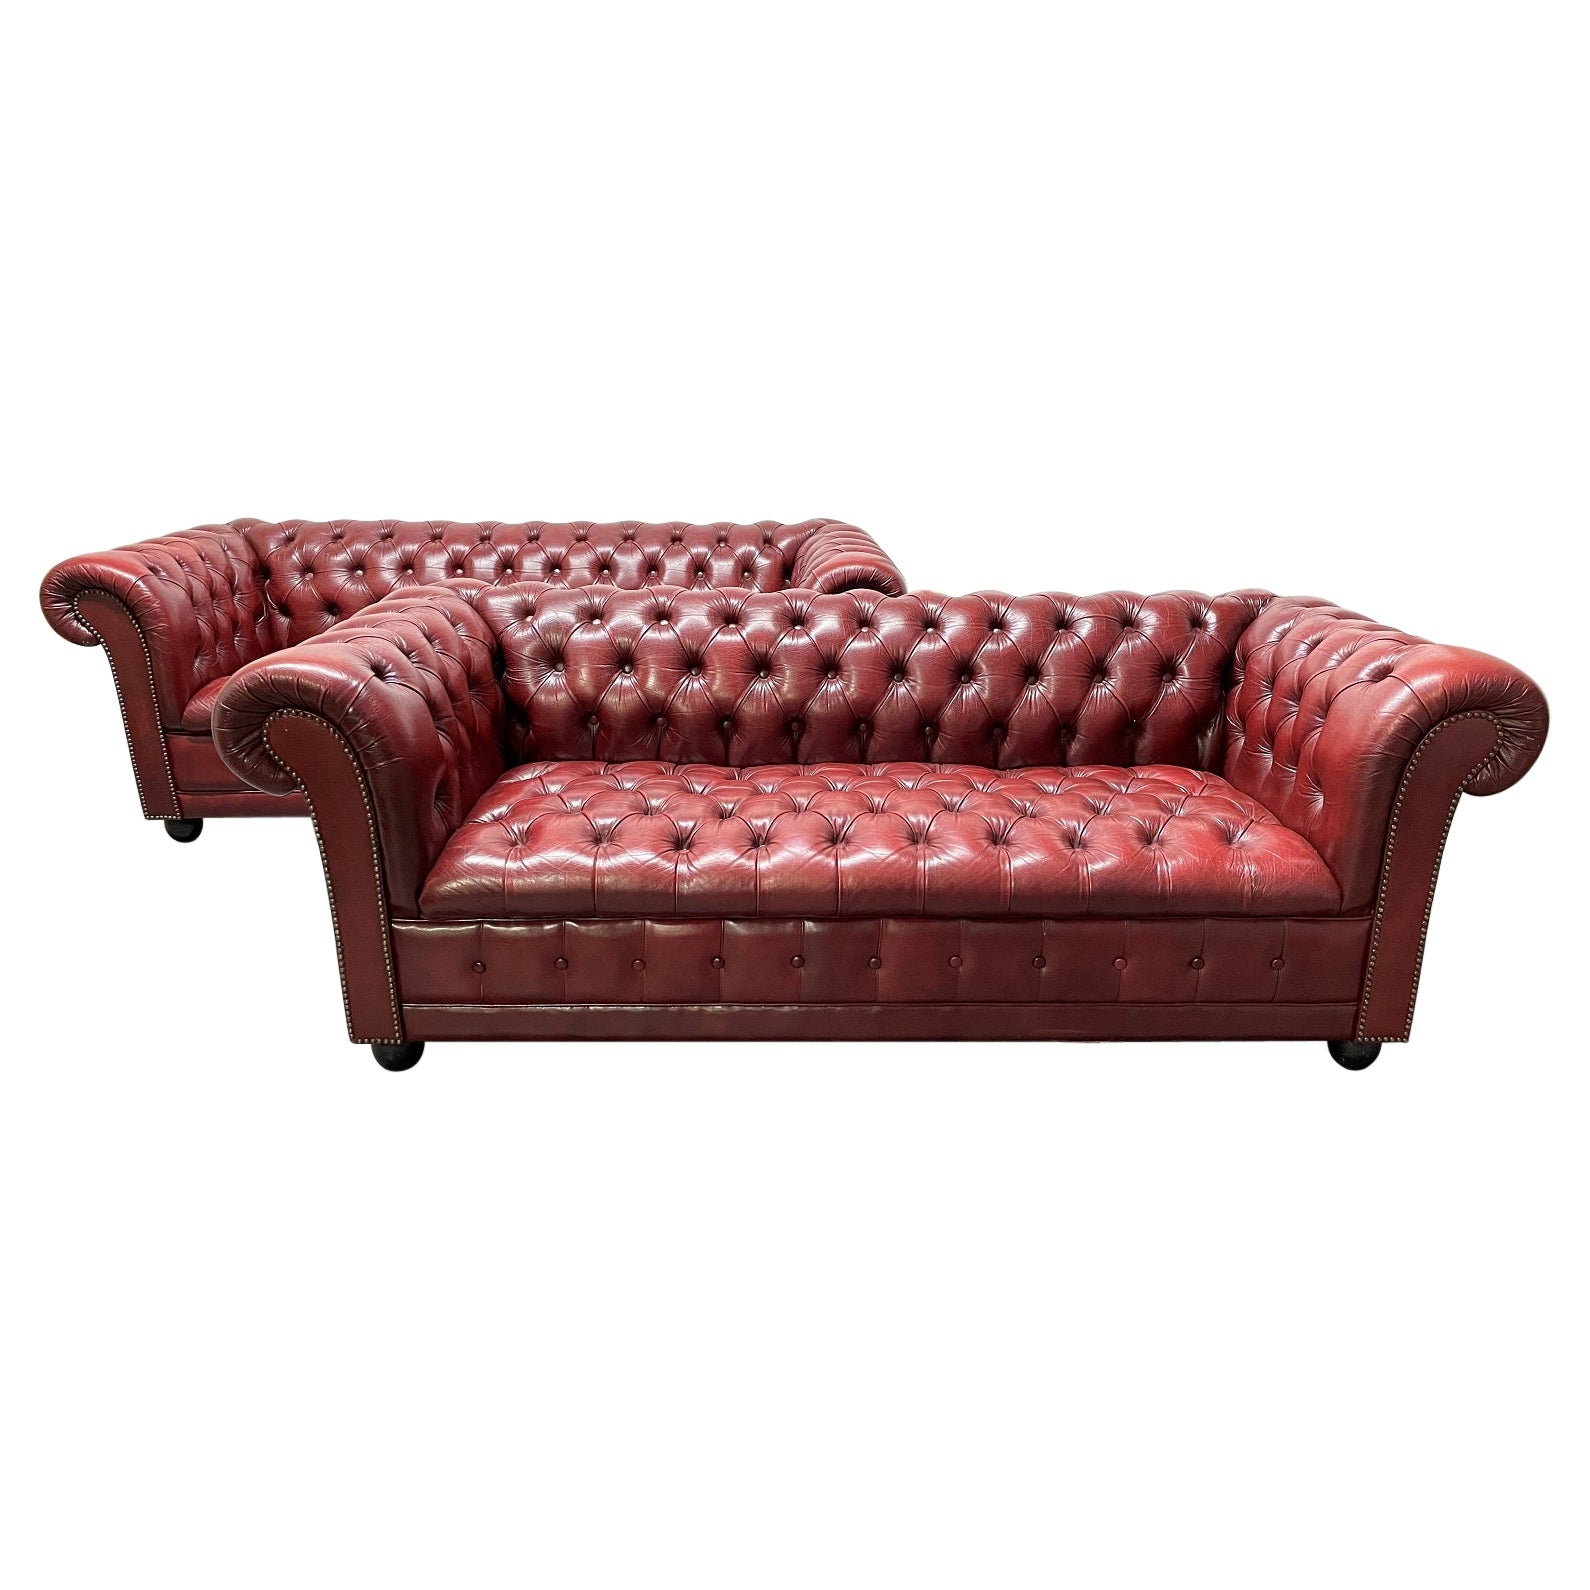 Pair Vintage Tufted Leather Chesterfield Sofas